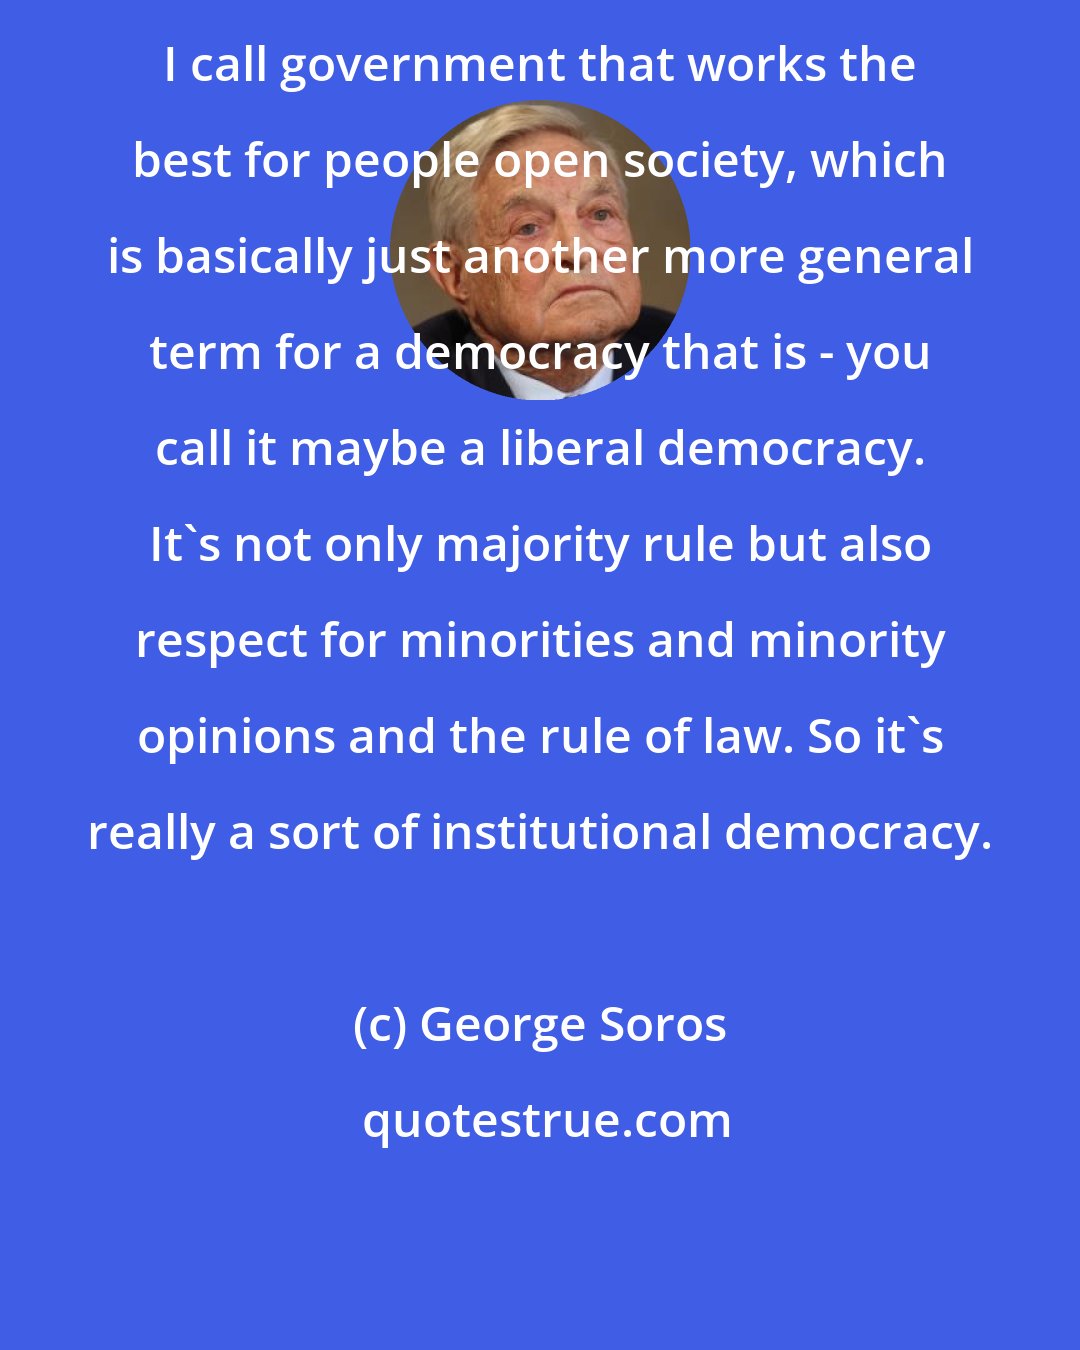 George Soros: I call government that works the best for people open society, which is basically just another more general term for a democracy that is - you call it maybe a liberal democracy. It's not only majority rule but also respect for minorities and minority opinions and the rule of law. So it's really a sort of institutional democracy.